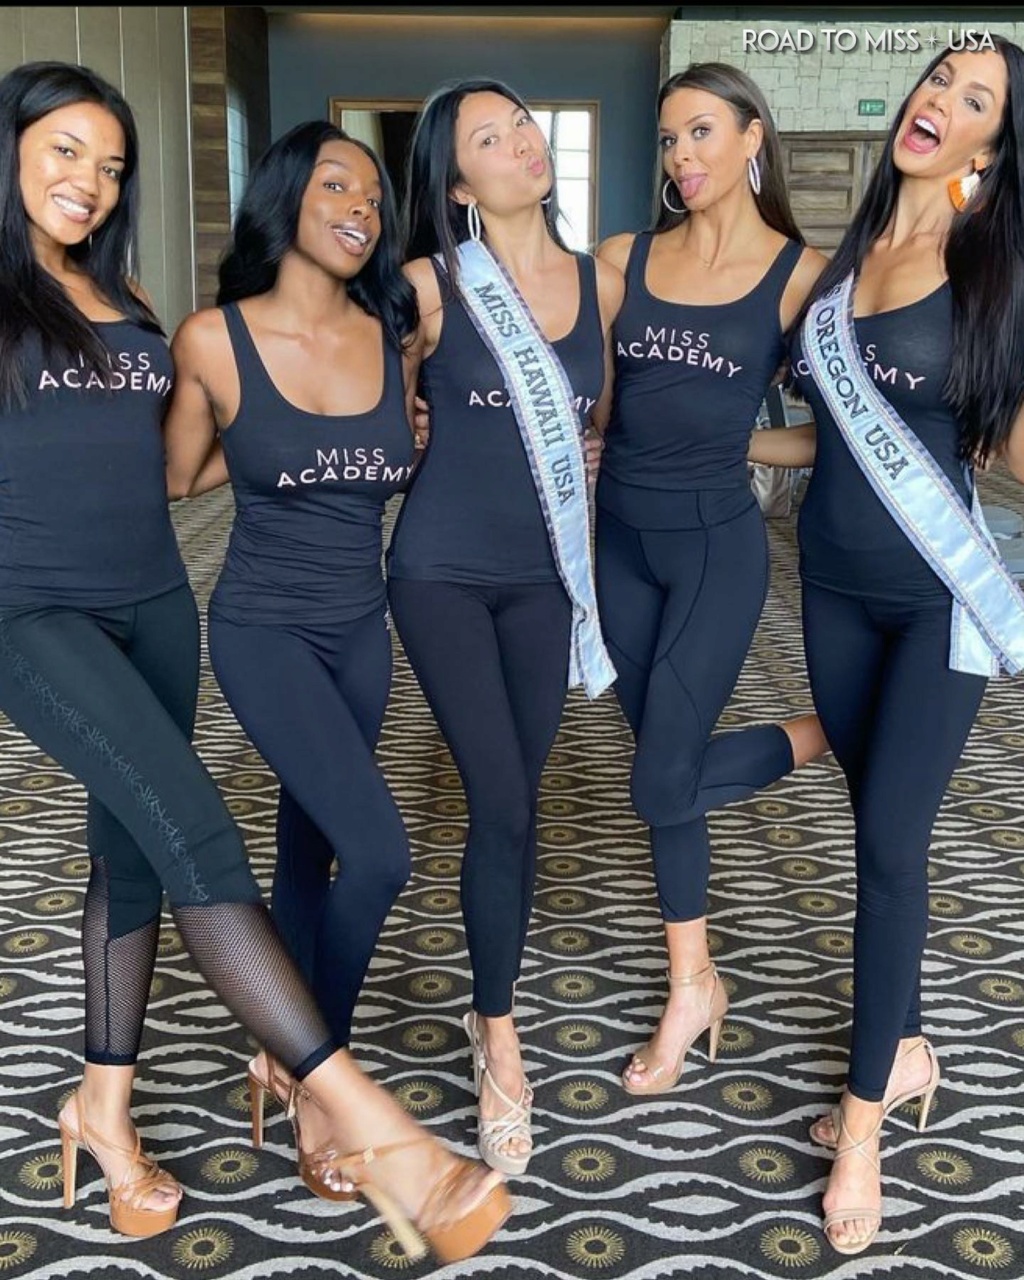 ROAD TO MISS USA 2021 is KENTUCKY! - Page 3 24239610